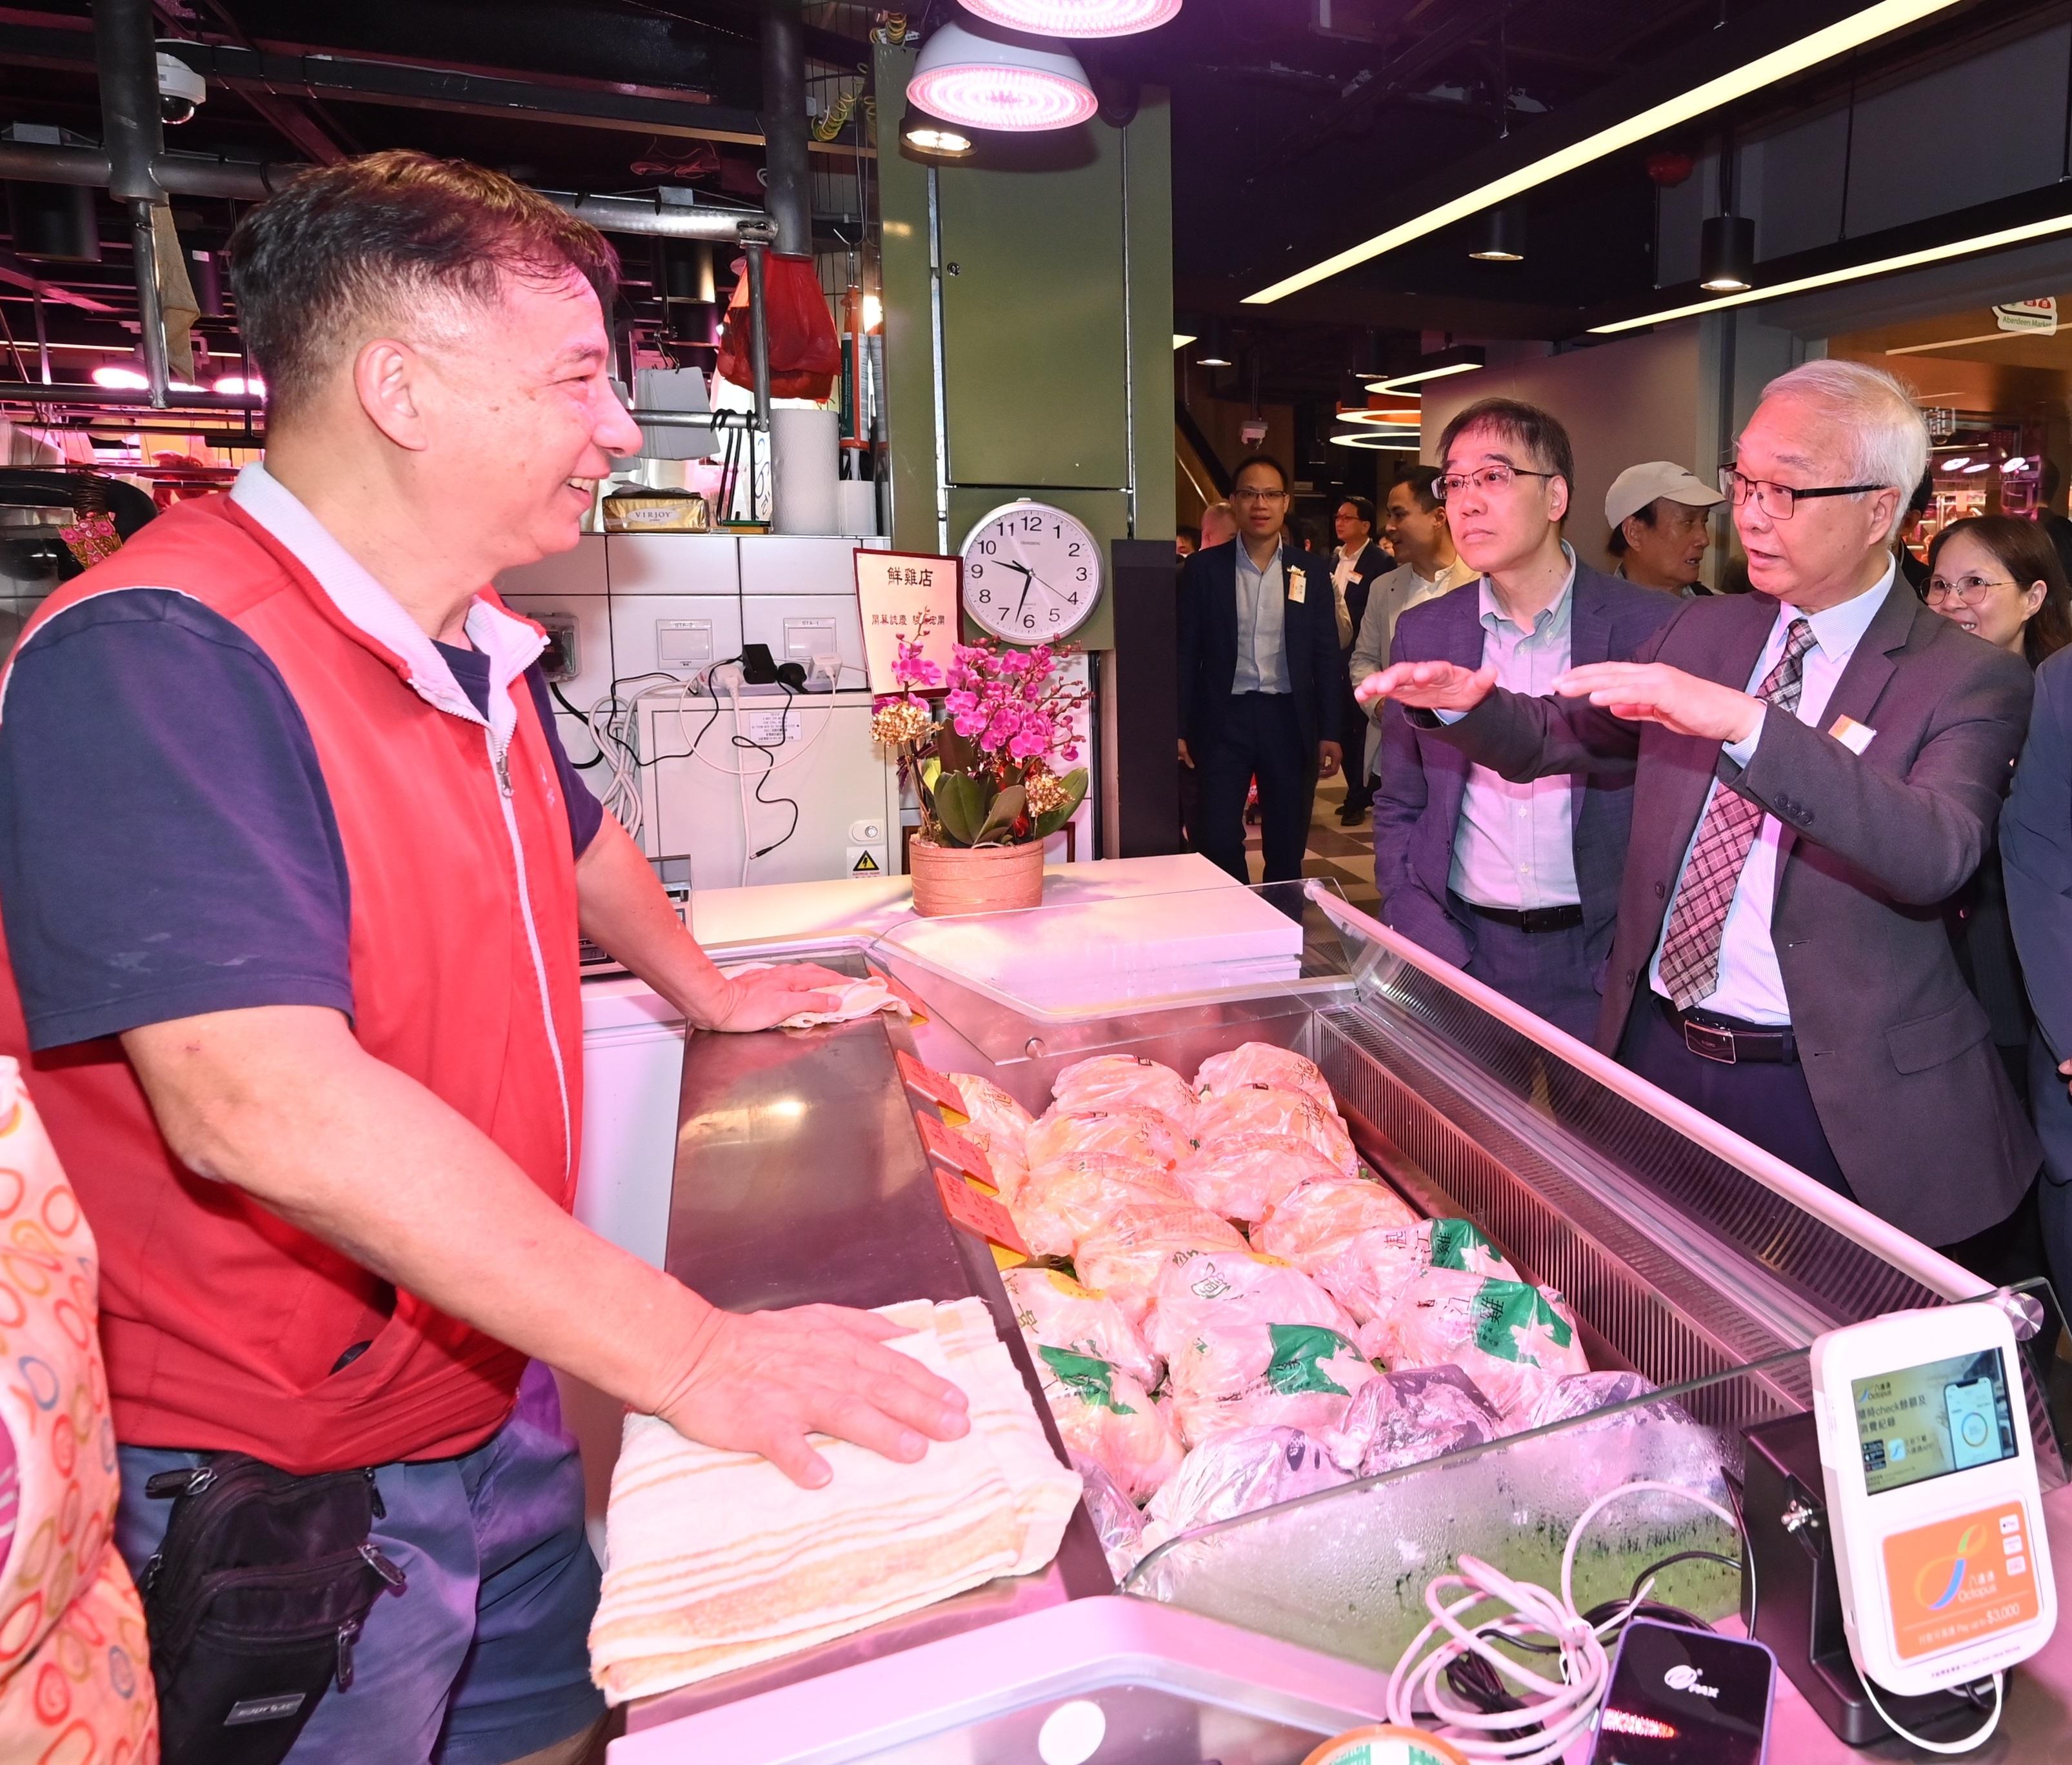 The opening ceremony of the overhauled Aberdeen Market under the Food and Environmental Hygiene Department was held today (May 19). Photo shows the Secretary for Environment and Ecology, Mr Tse Chin-wan (first right), chatting with a market stall tenant after officiating at the opening ceremony.